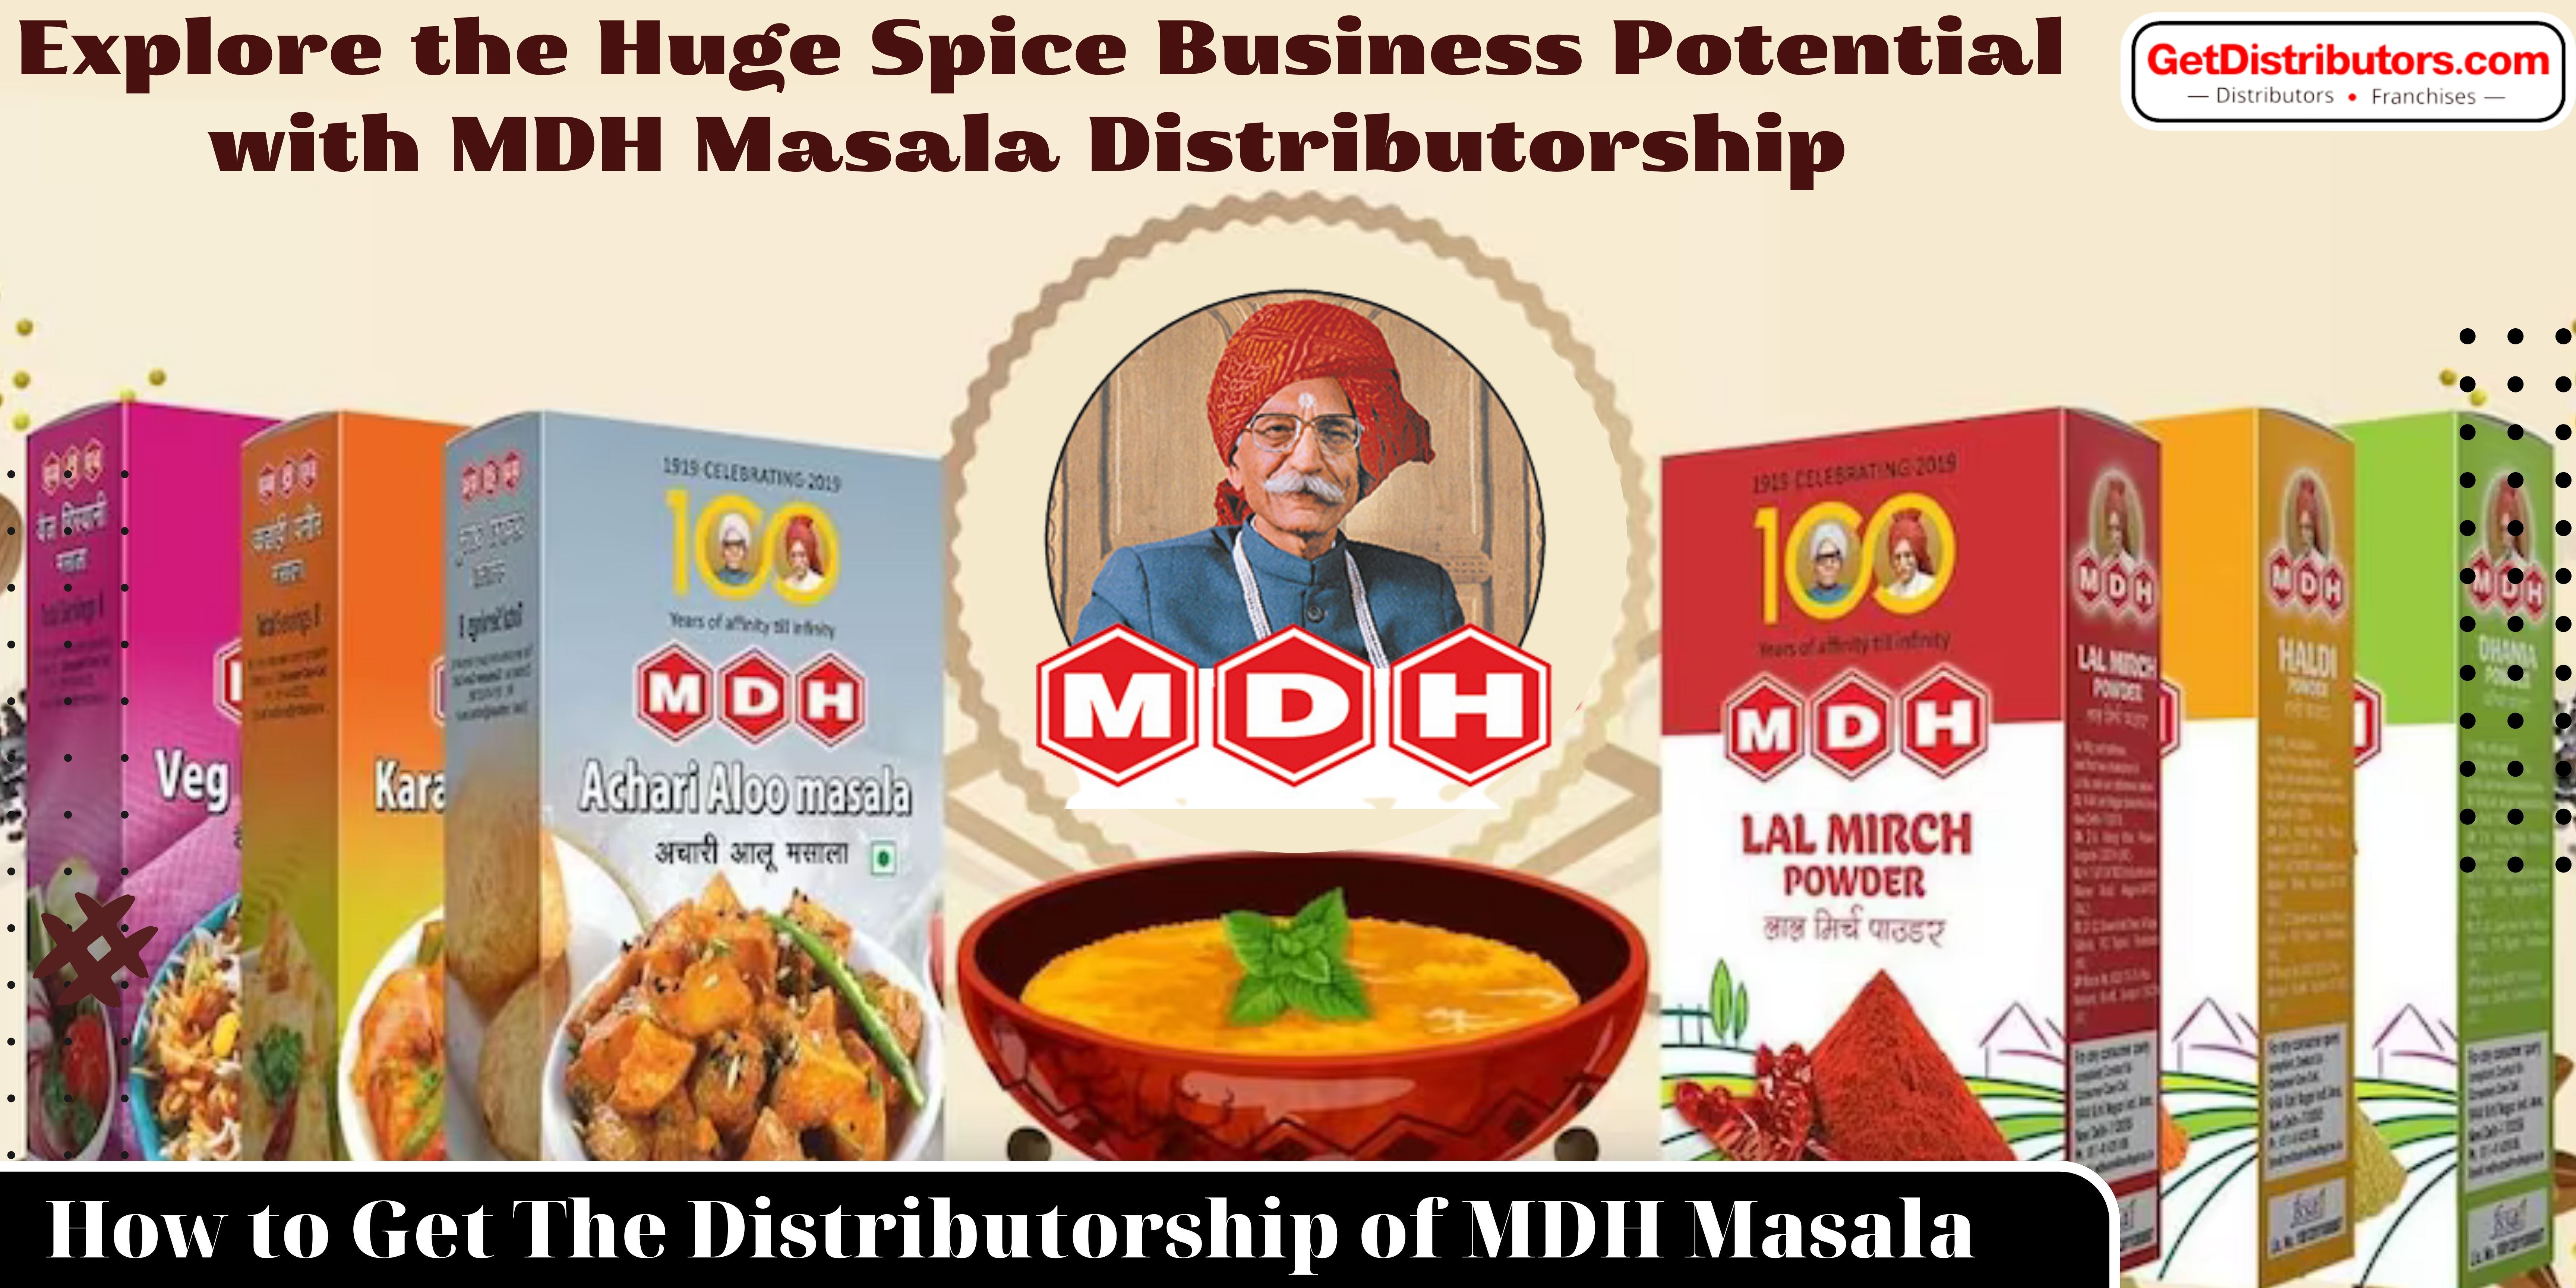 Explore the Huge Spice Business Potential with MDH Masala Distributorship